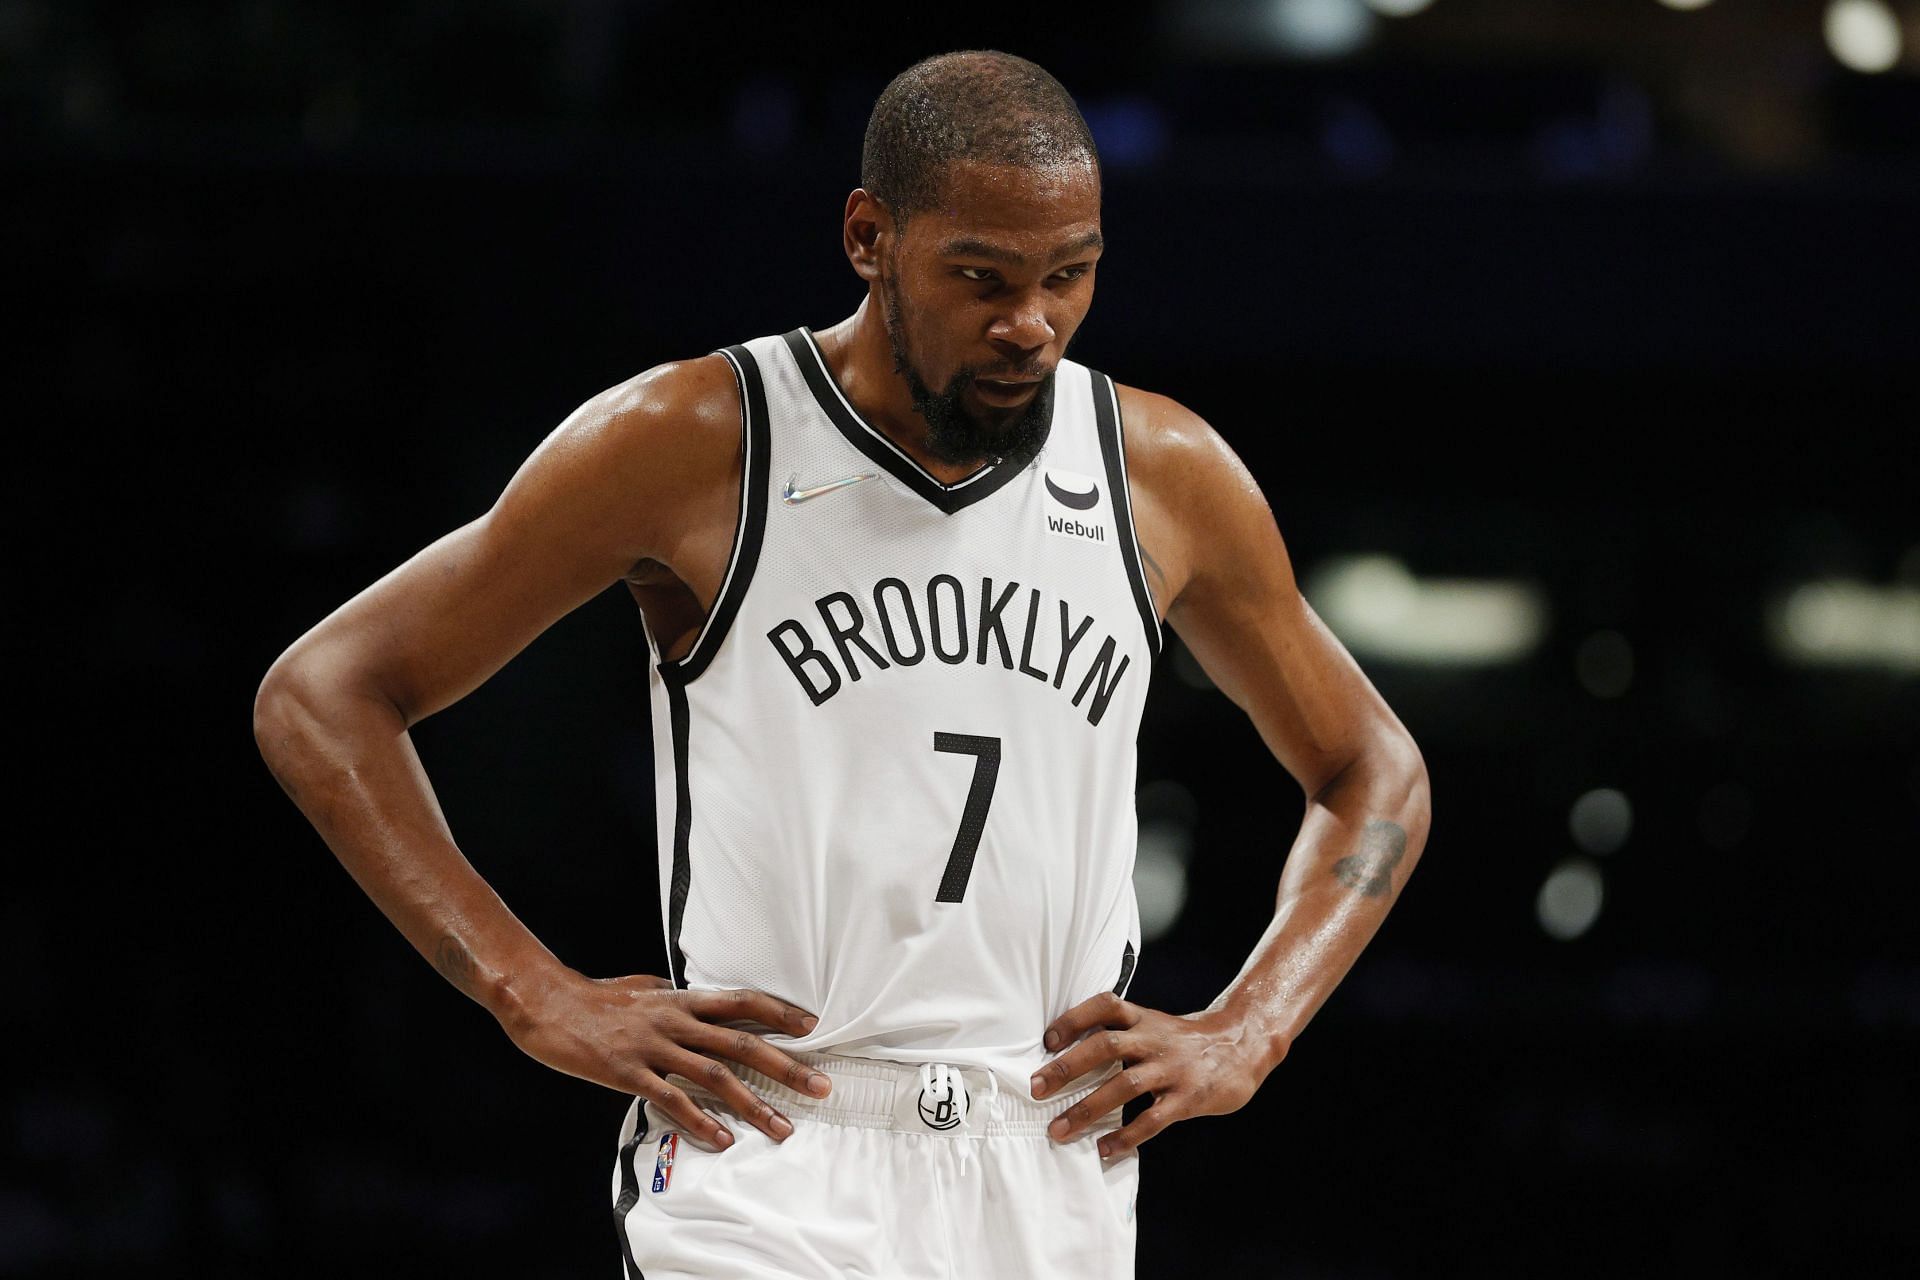 After a summer of disarray, the Brooklyn Nets have to figure out what to do with Kyrie Irving